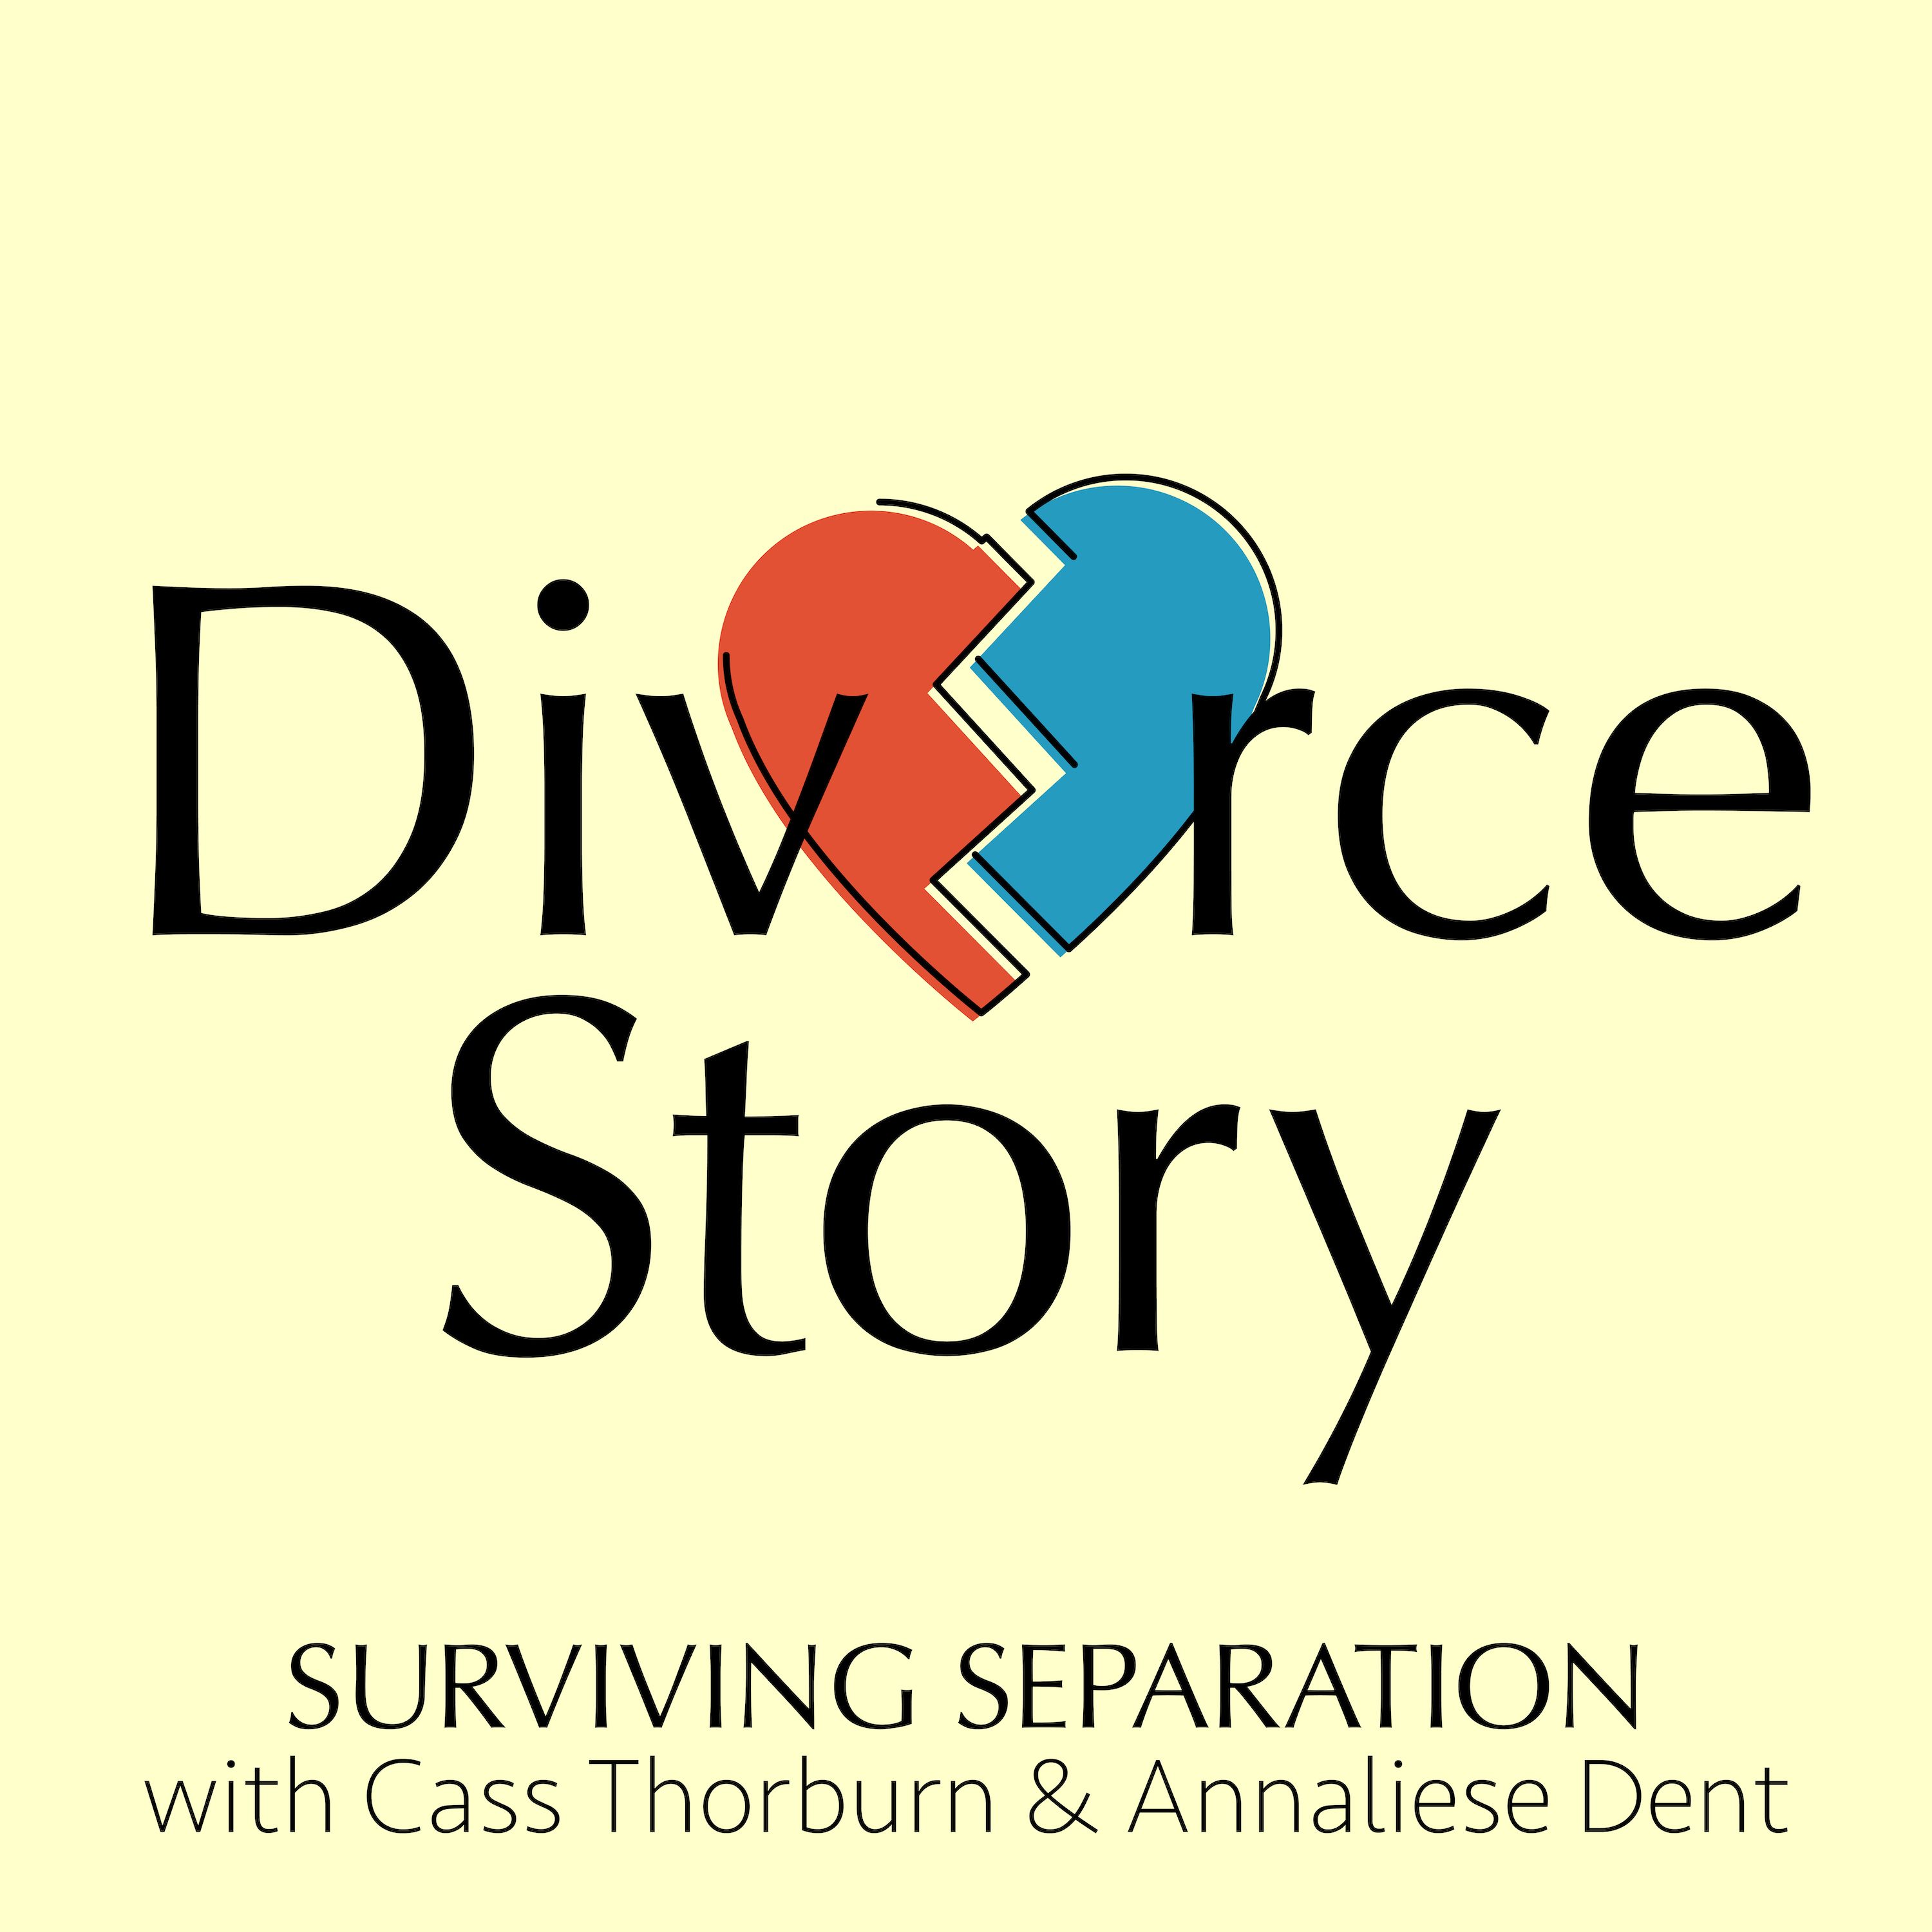 Divorce Story - Is the marriage over? 